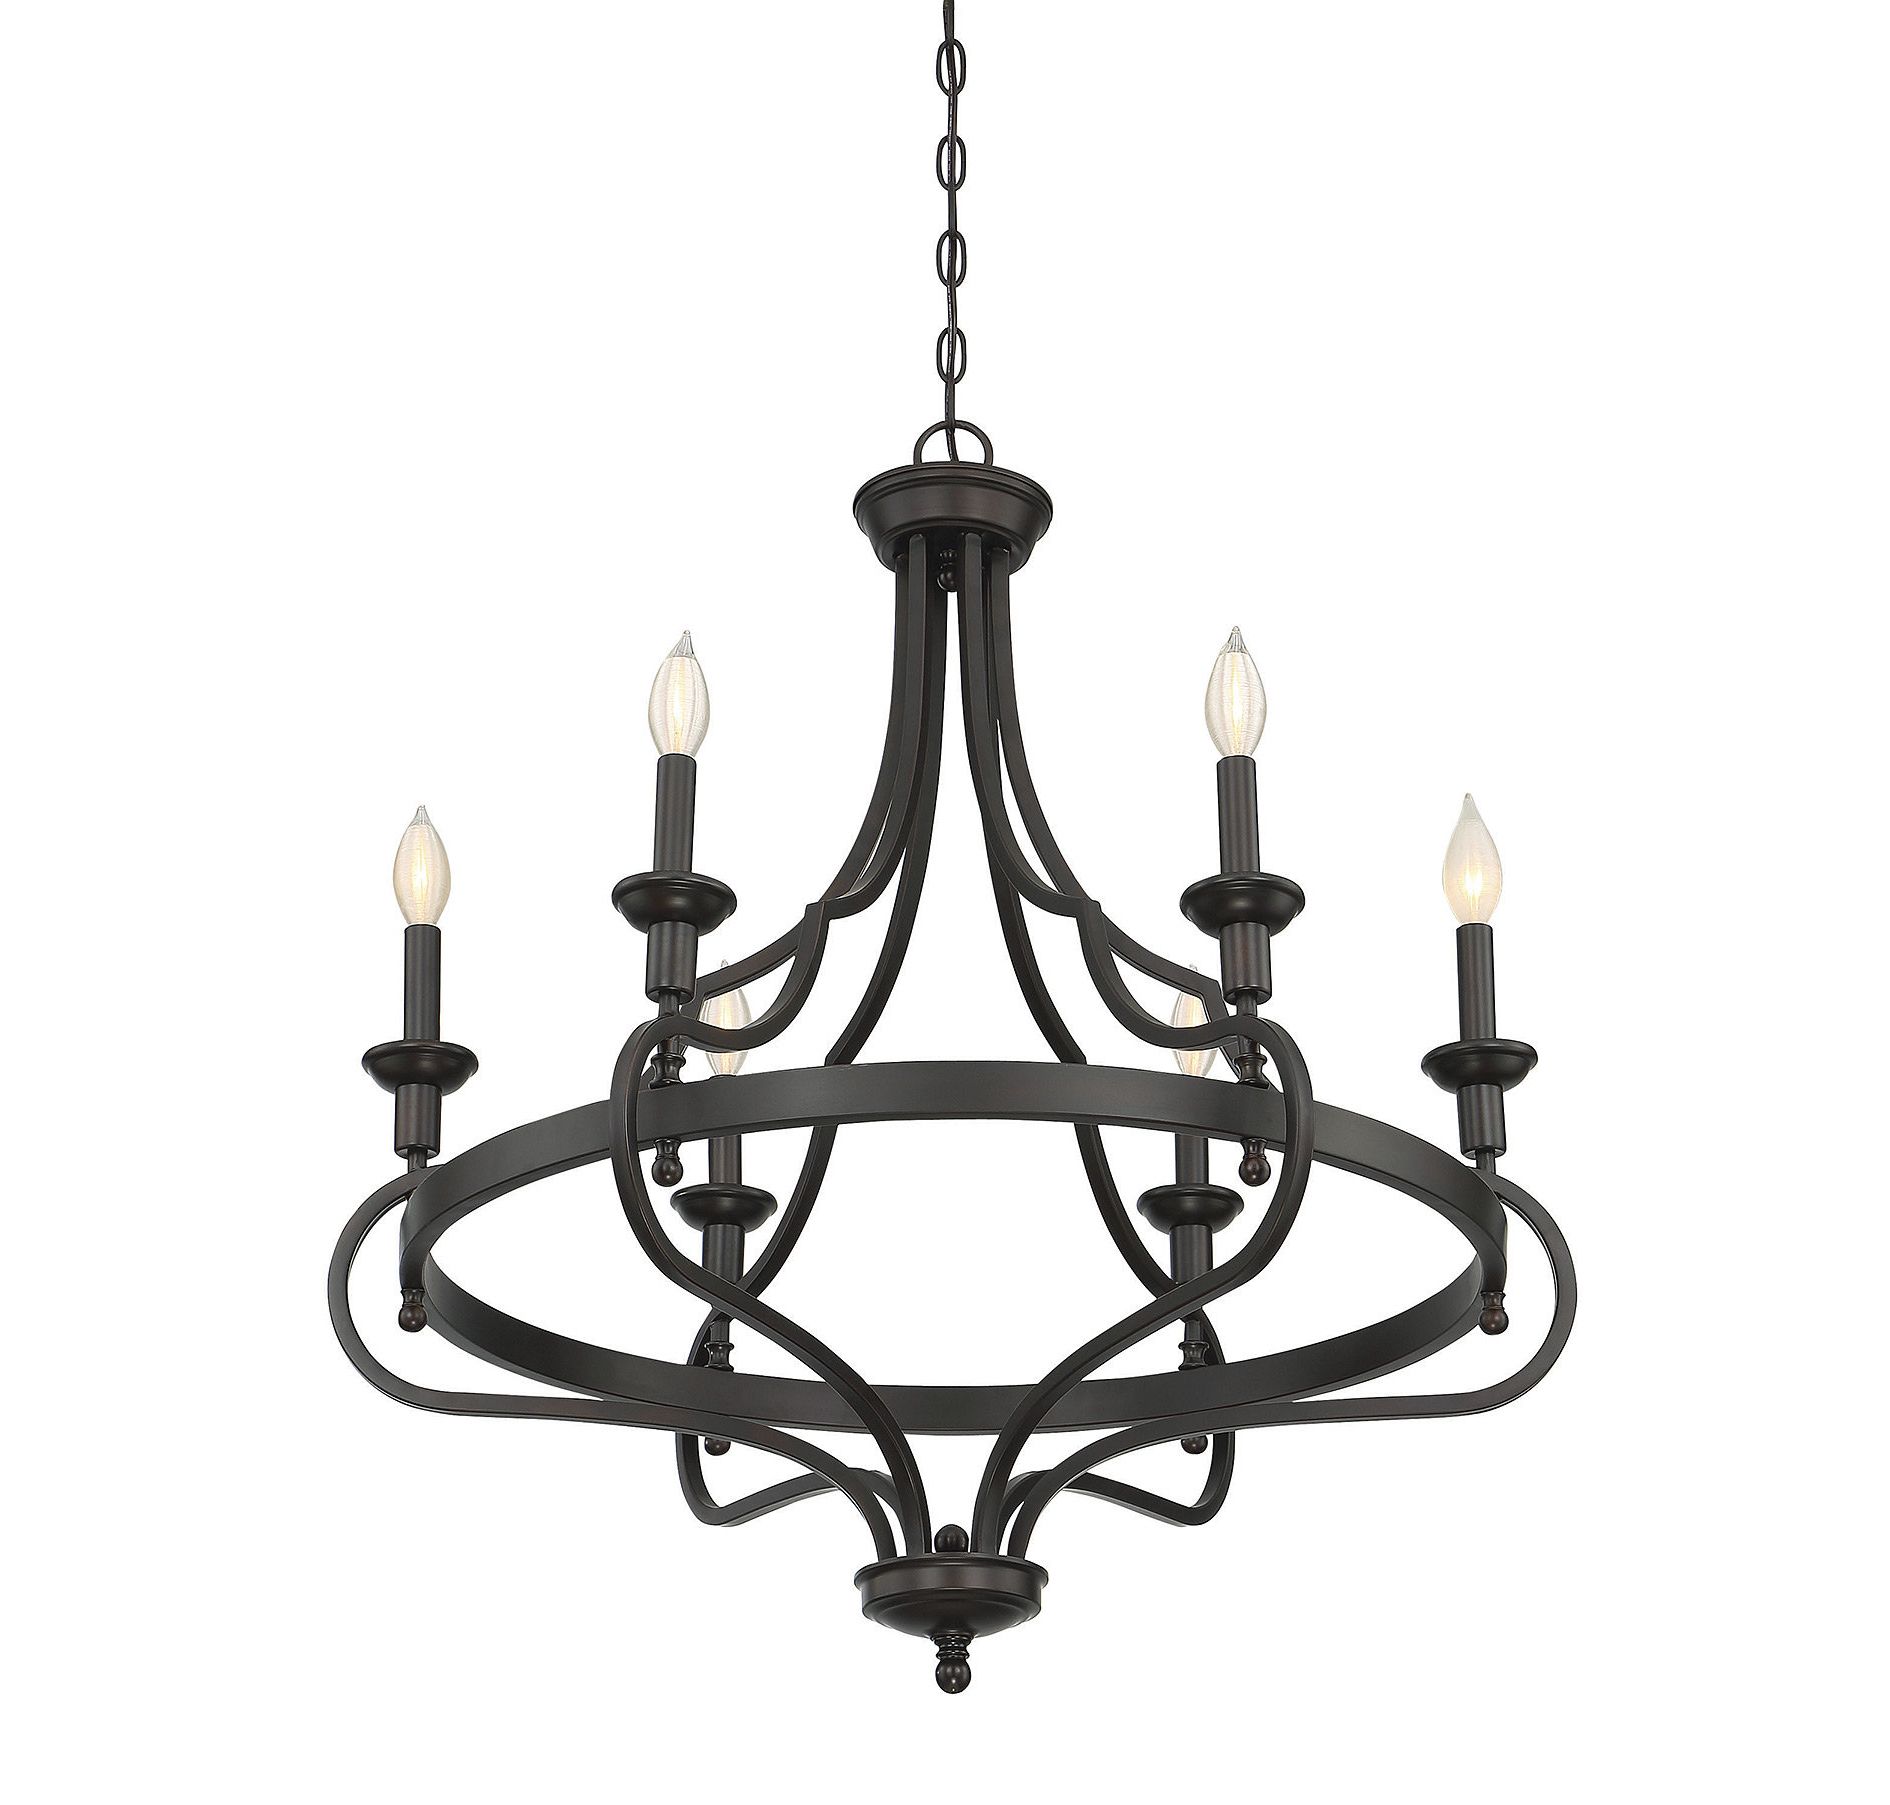 Jaycee 6 Light Chandelier With Most Recent Perseus 6 Light Candle Style Chandeliers (View 16 of 25)